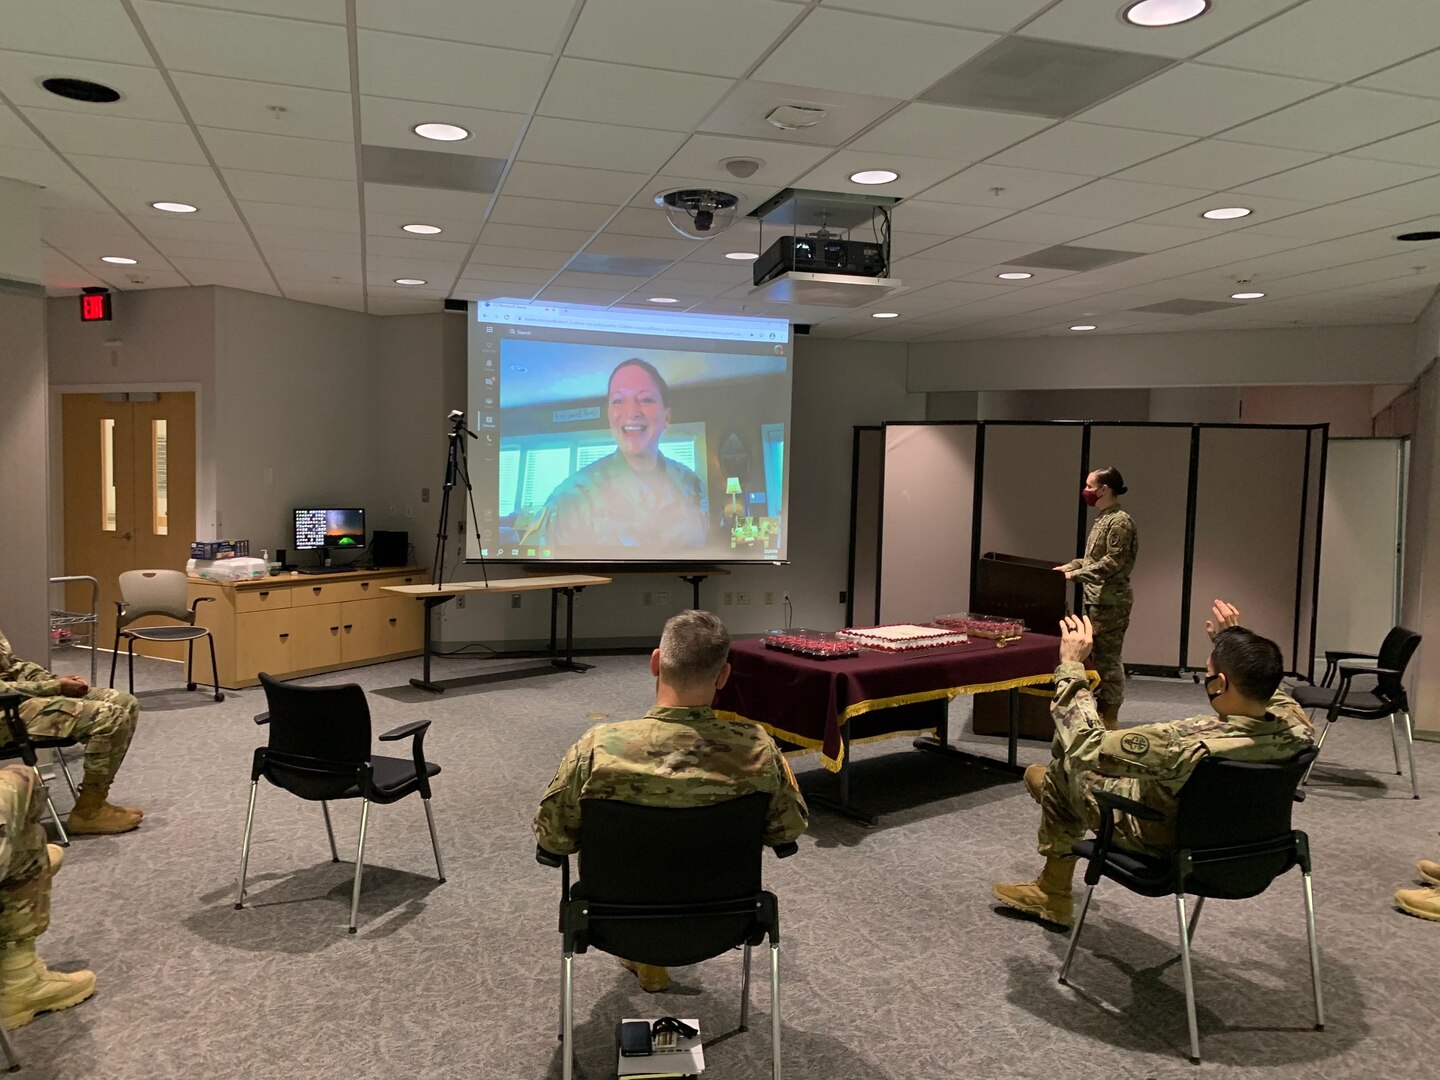 Soldiers sitting in chairs in a classroom while a soldier is talking virtually and shown on a movie screen.